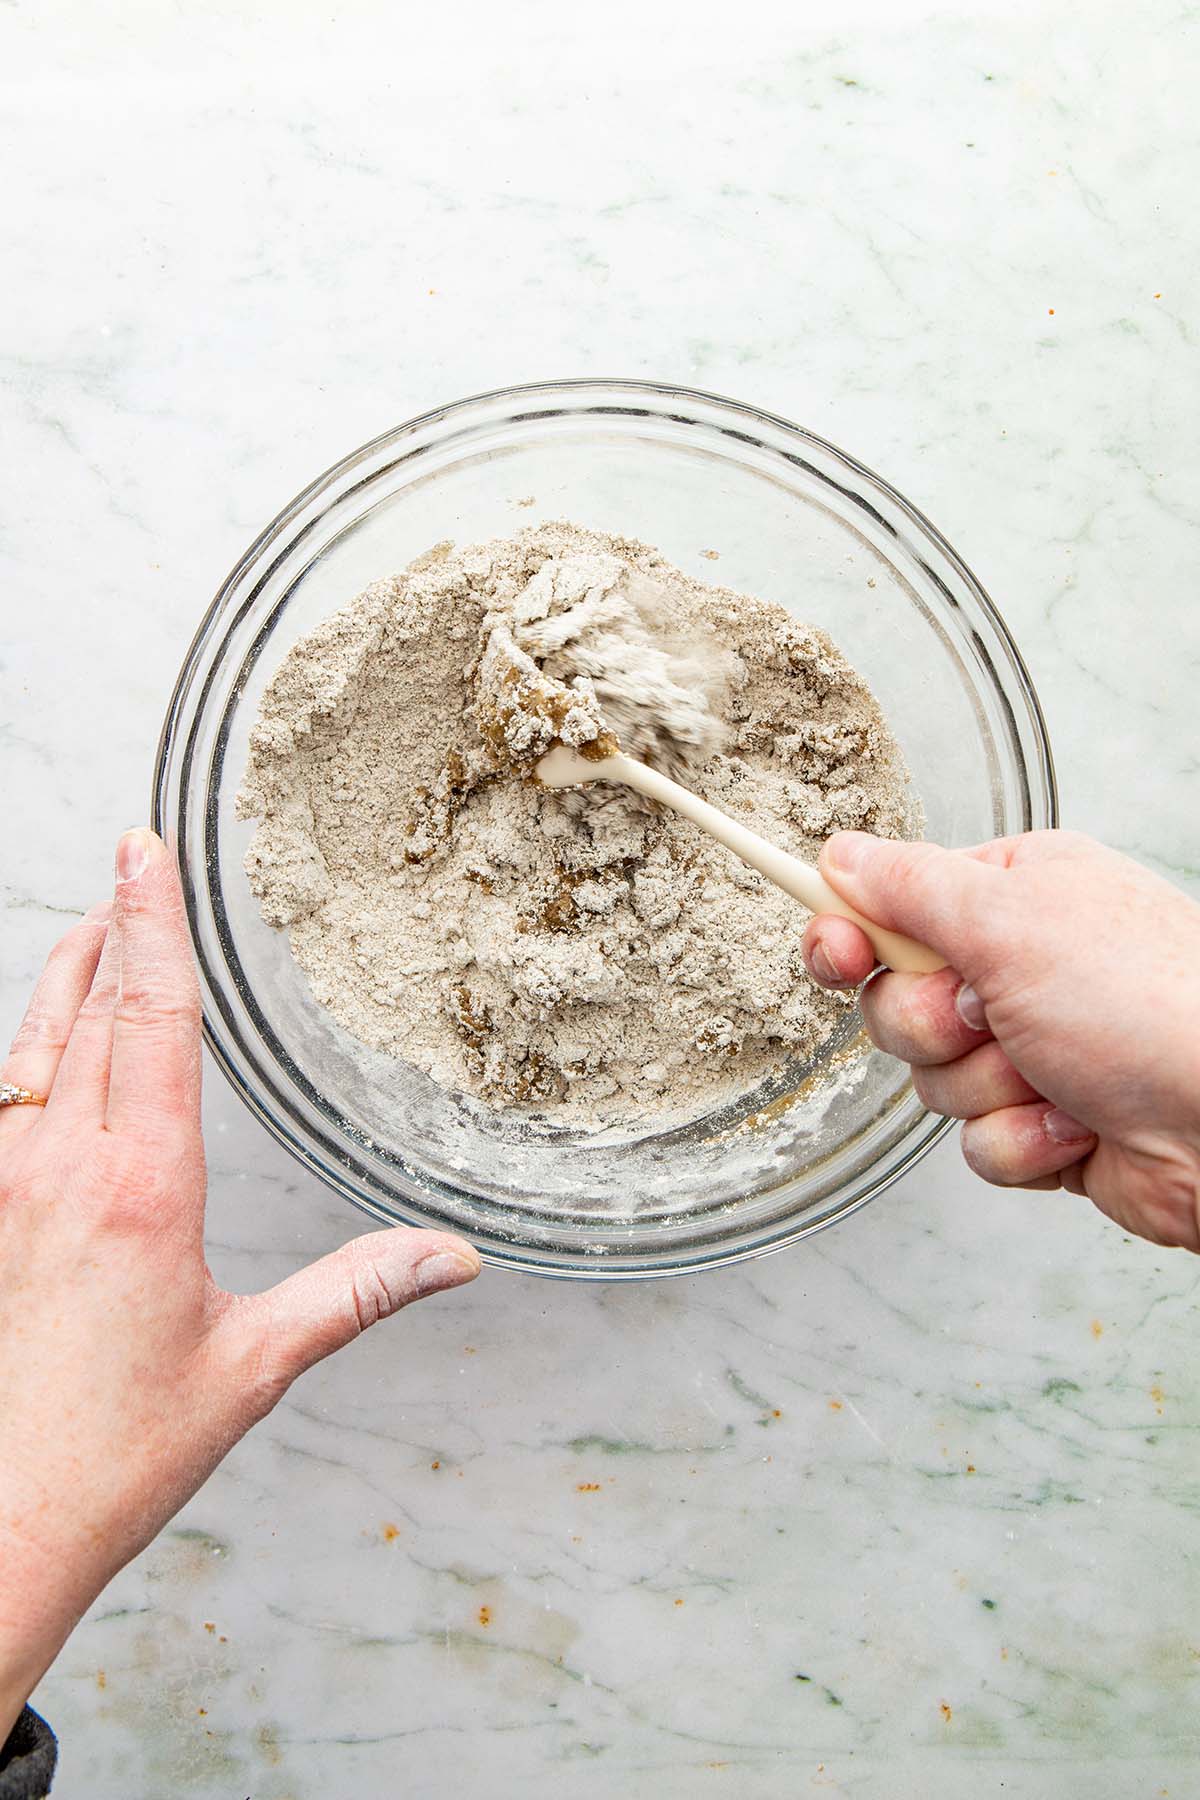 A hand using a for to stir melted butter into a bowl of dry ingredients.